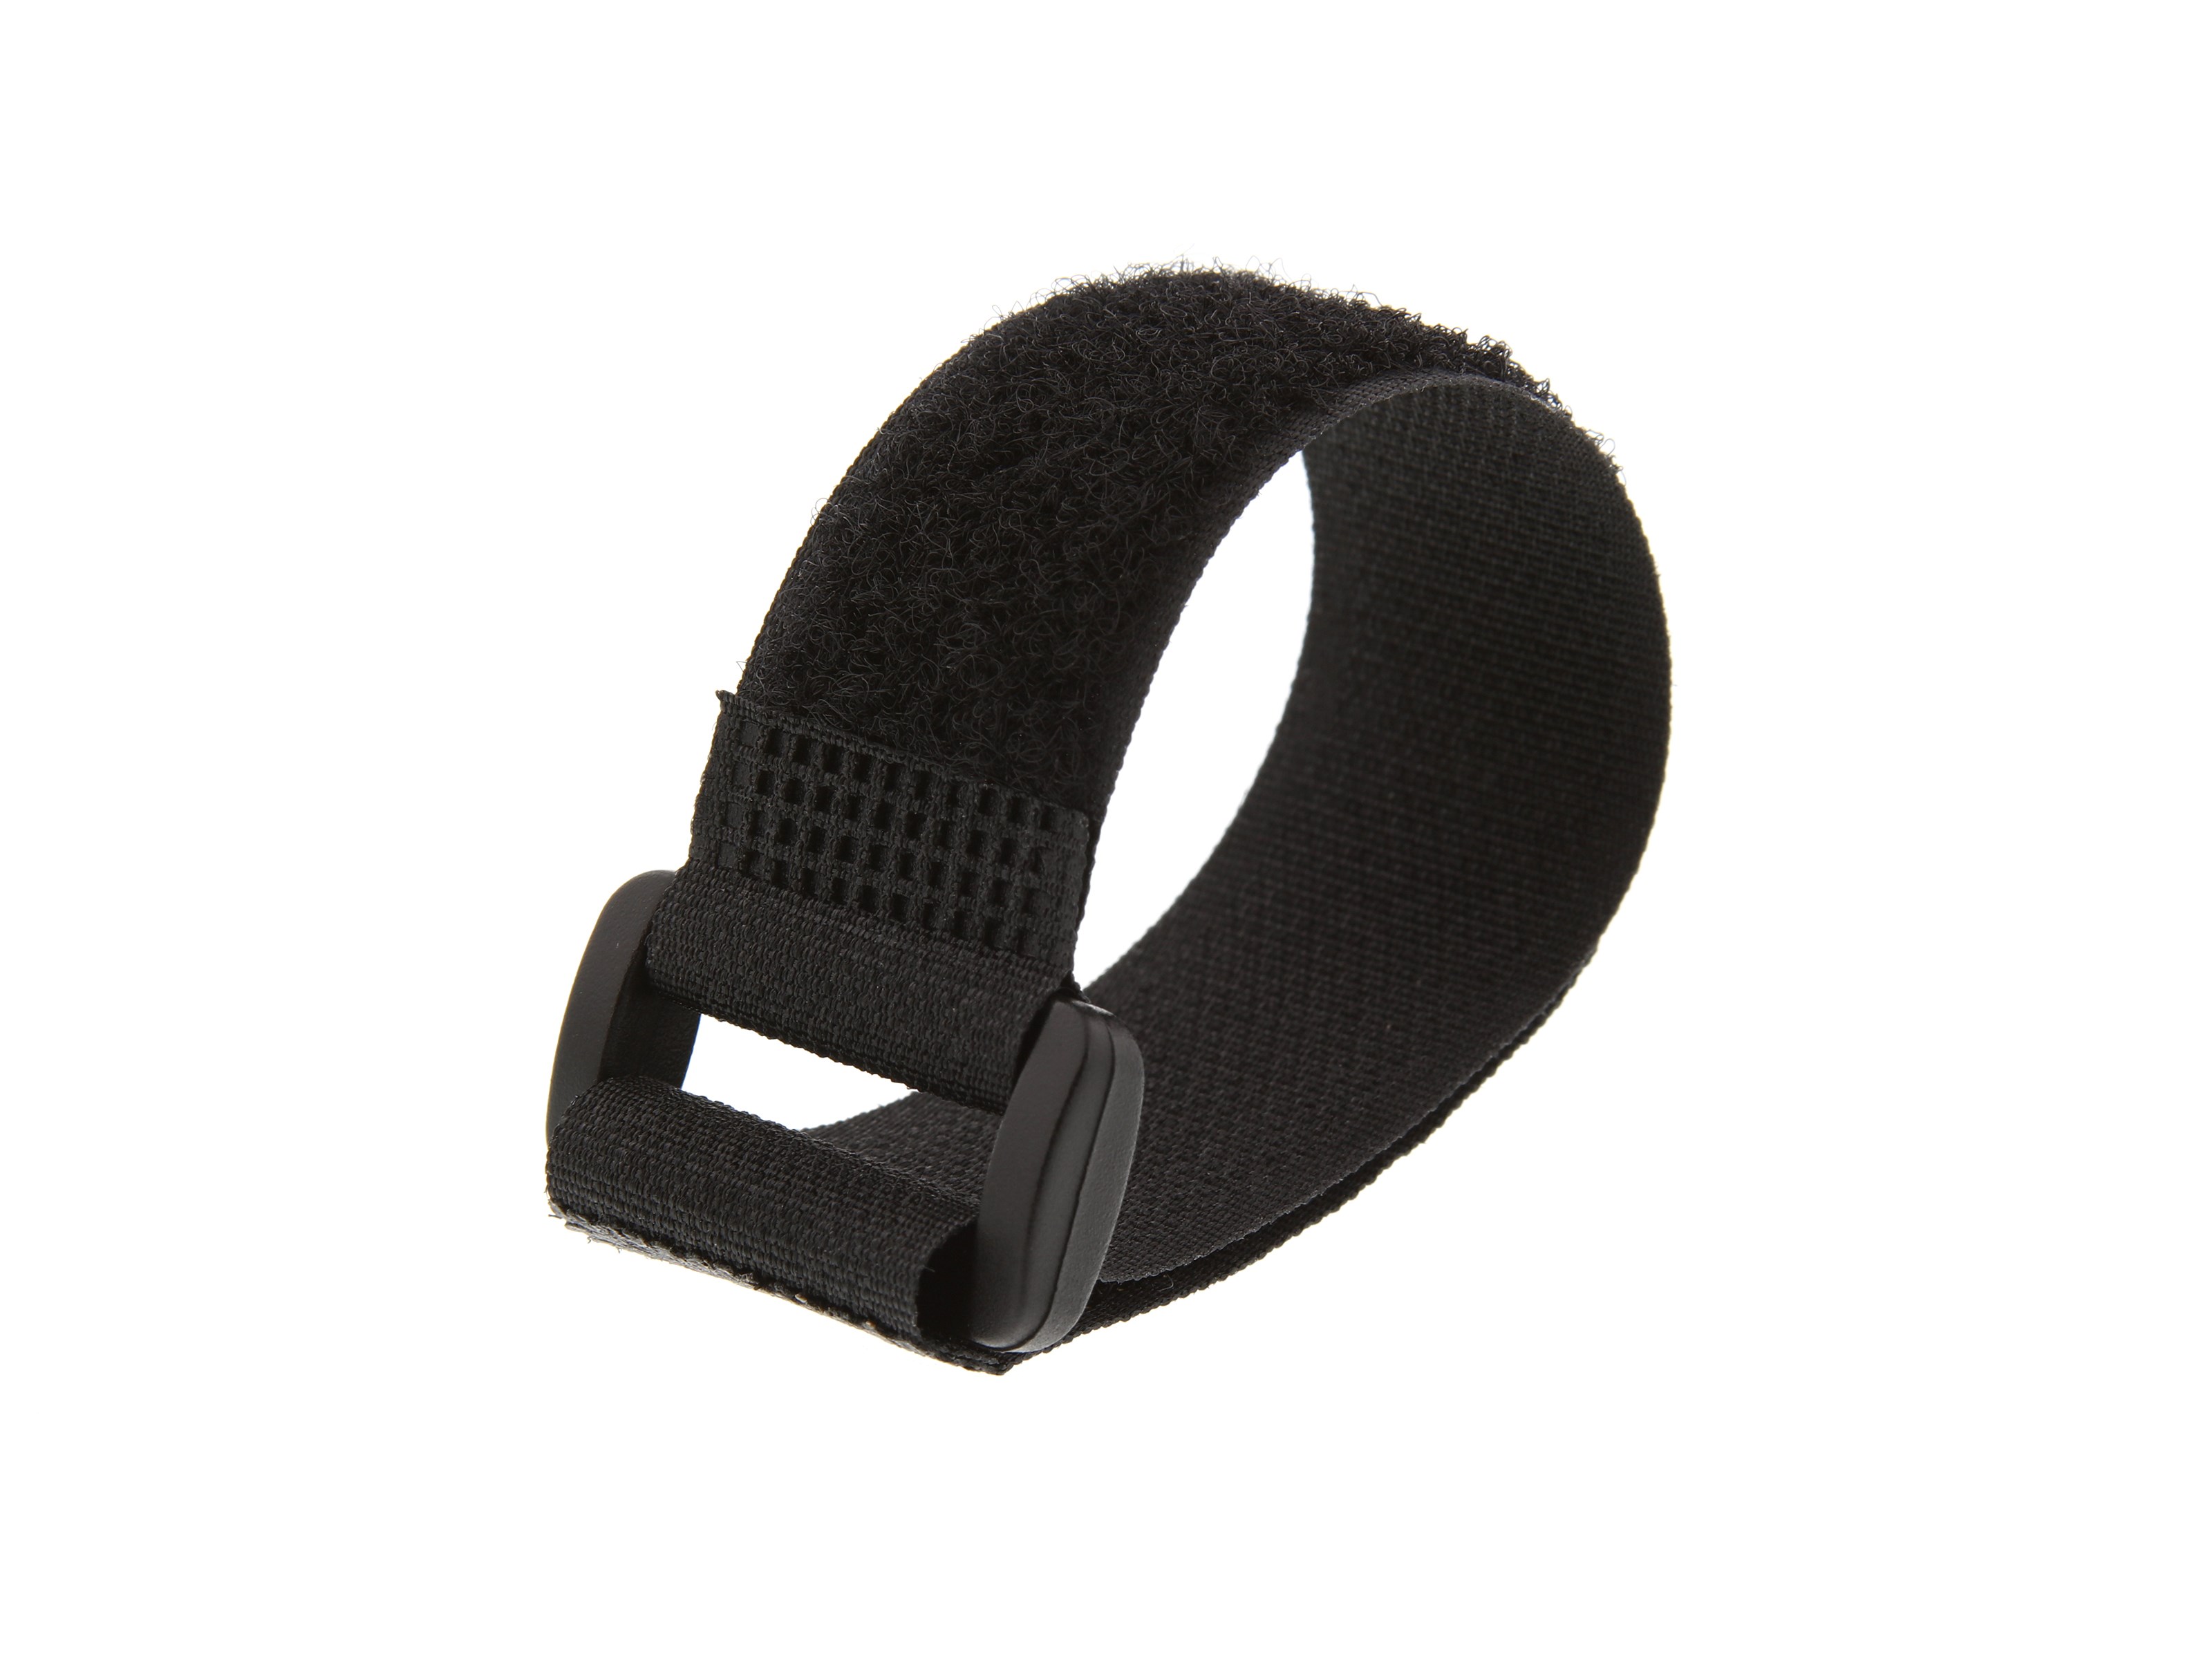 24 x 2 Inch Heavy Duty Black Cinch Strap with Eyelet - 5 Pack